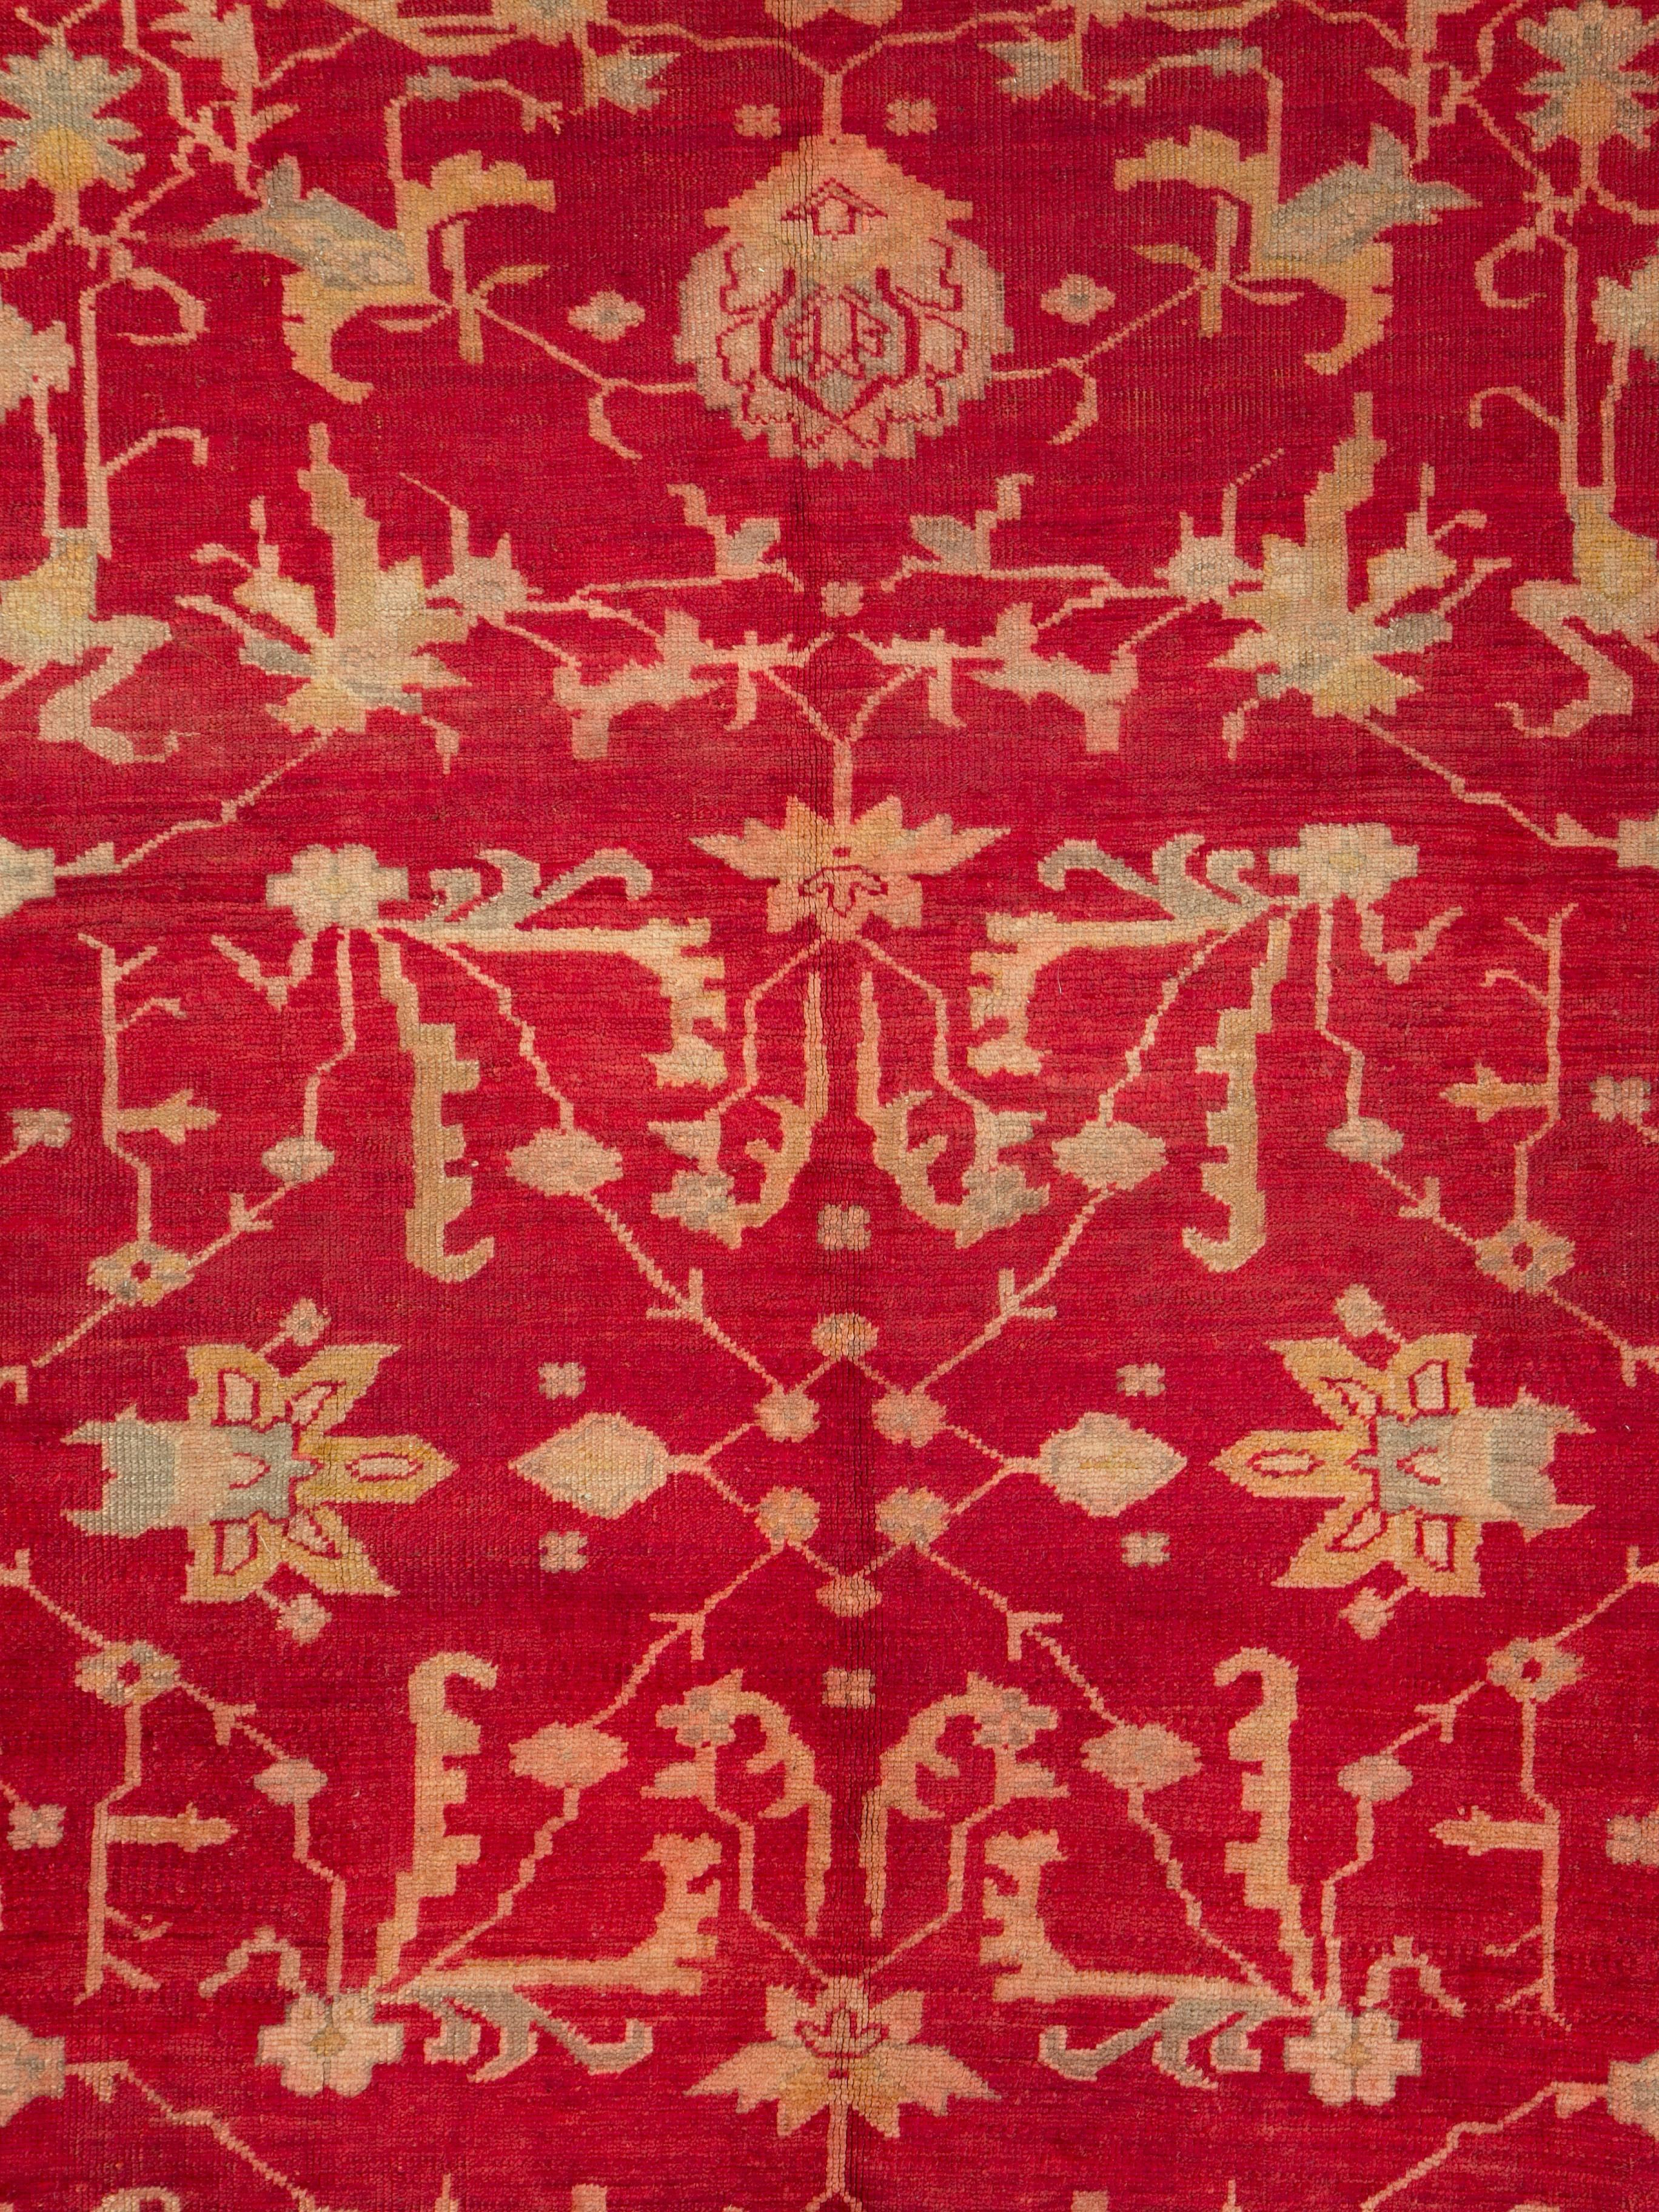 An antique Turkish Oushak room size carpet in square format handmade during the early 20th century with a bright red field and a slate grey wide border.

Measures: 10' 2